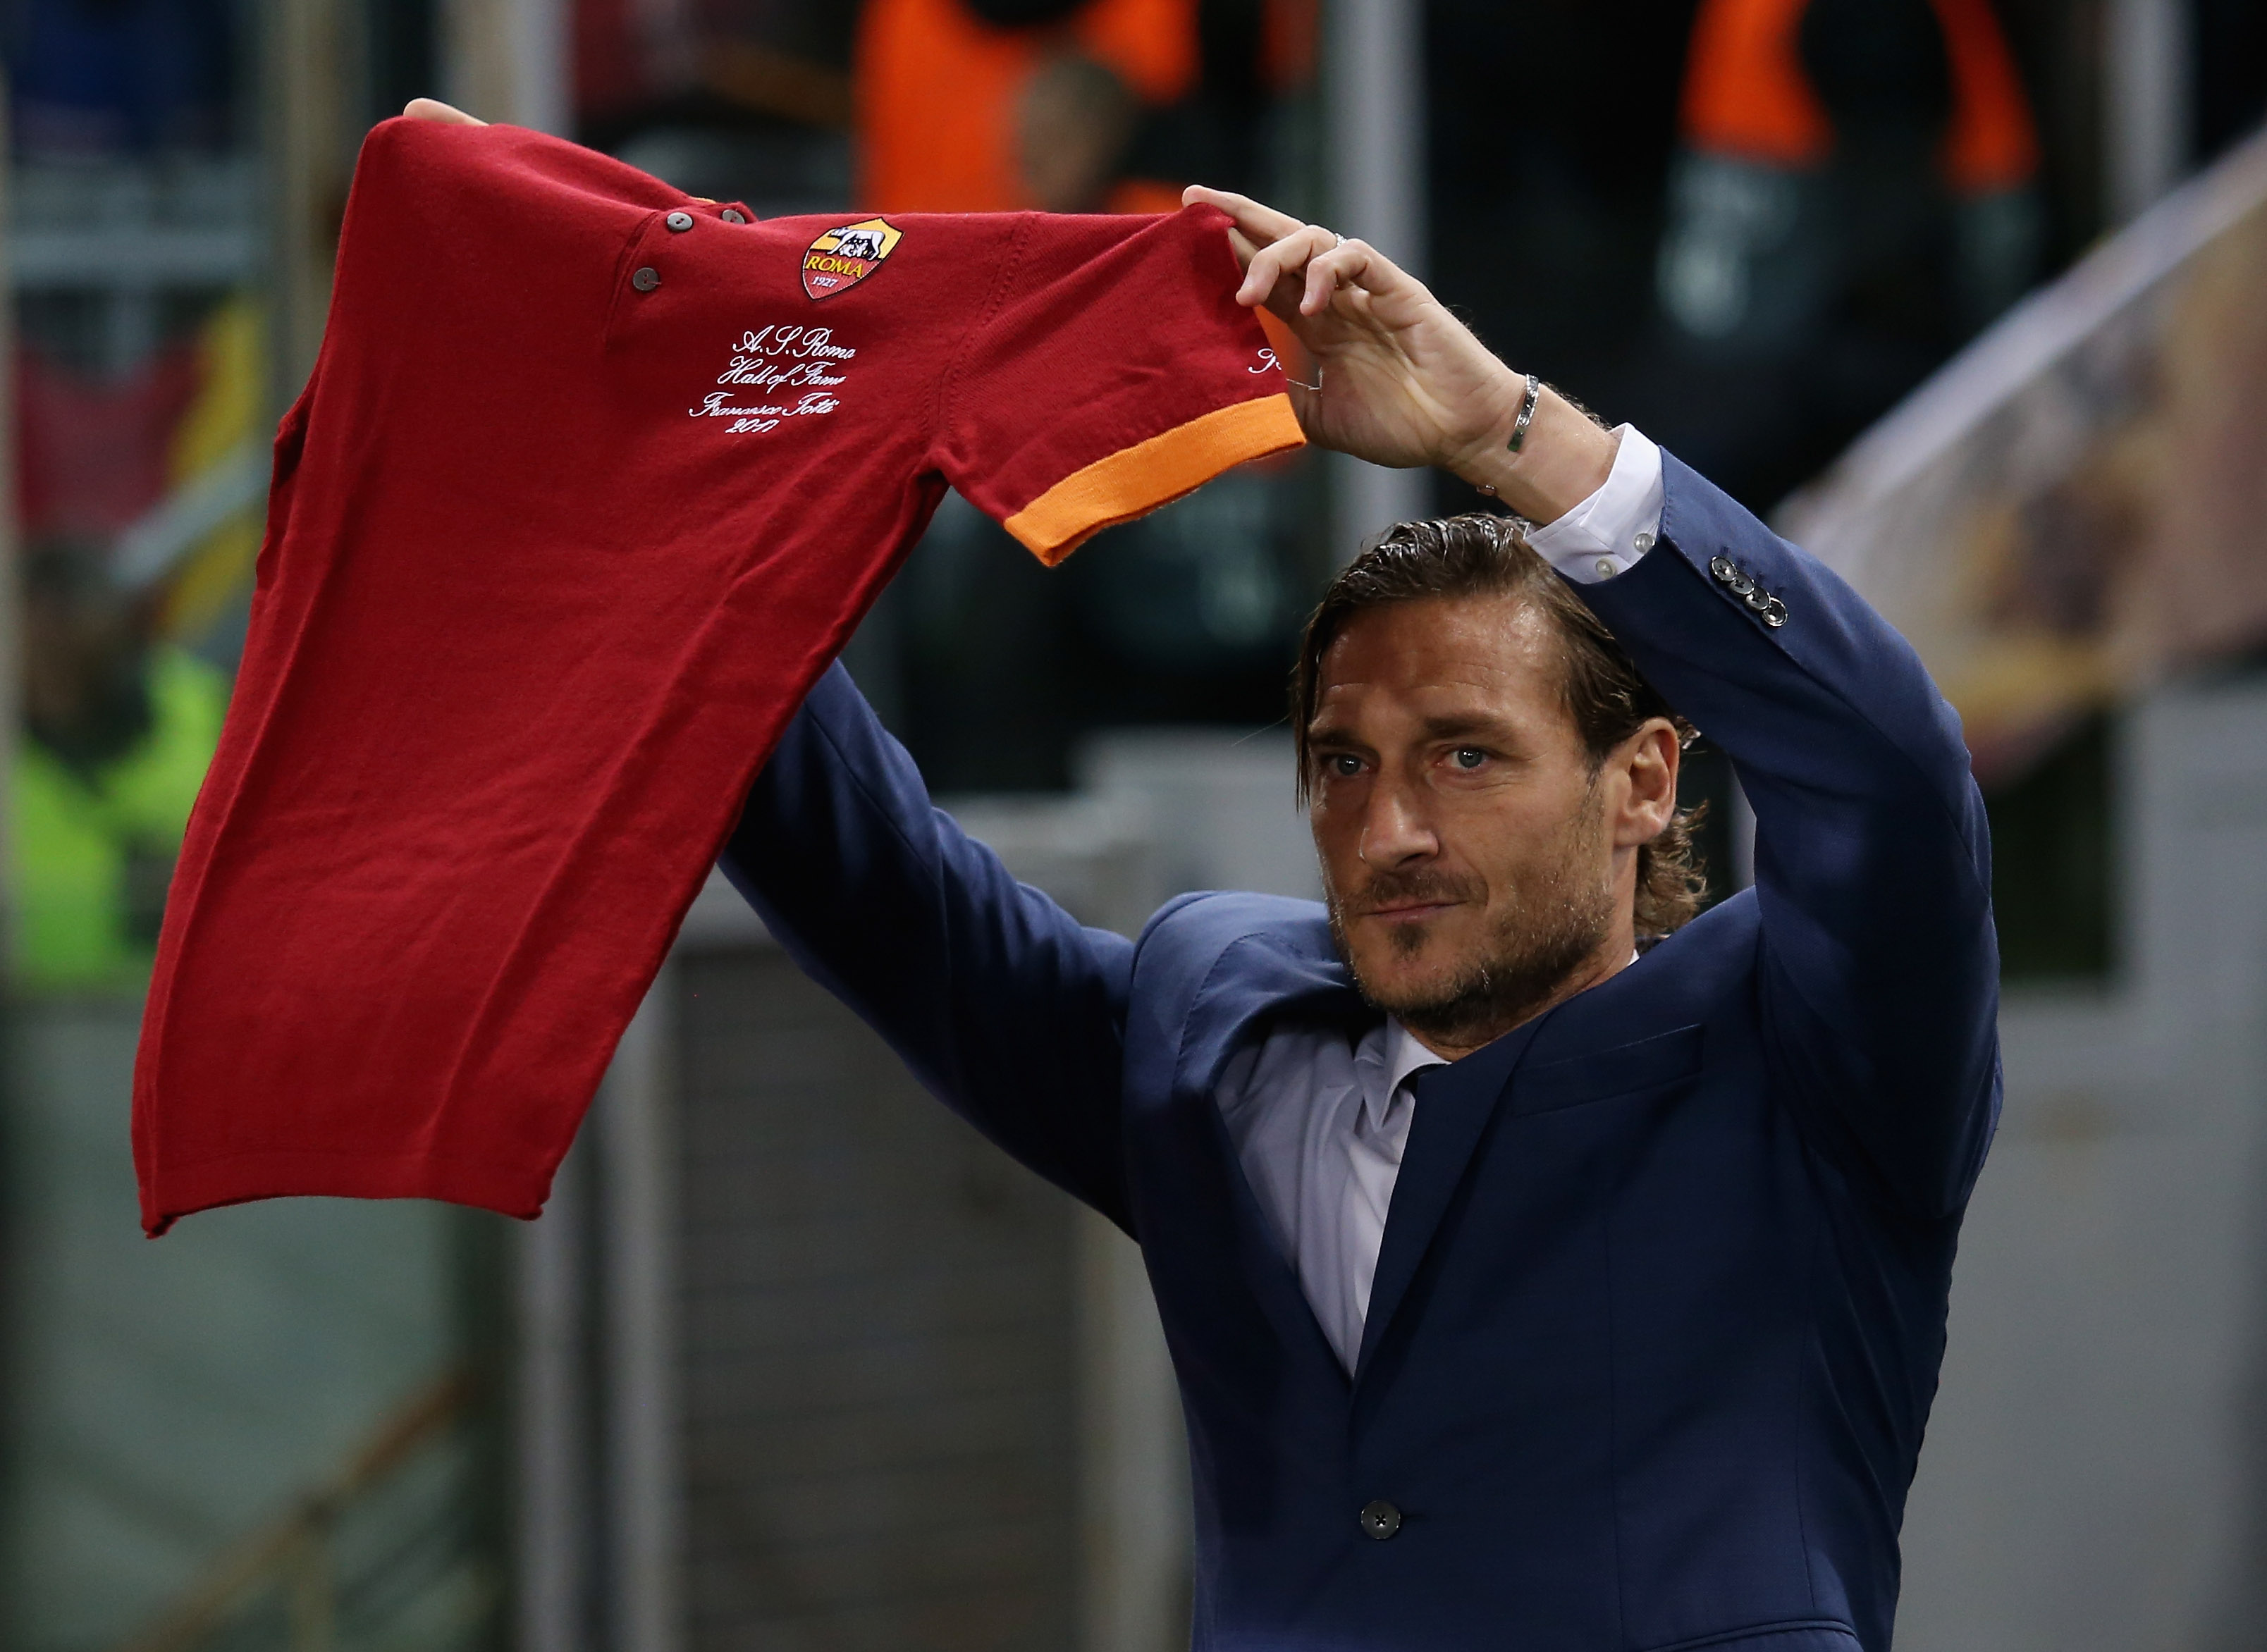 ROME, ITALY - NOVEMBER 27:  AS Roma former player Francesco Totti holds the Hall of Fame jersey before the group G match of the UEFA Champions League between AS Roma and Real Madrid at Stadio Olimpico on November 27, 2018 in Rome, Italy.  (Photo by Paolo Bruno/Getty Images)